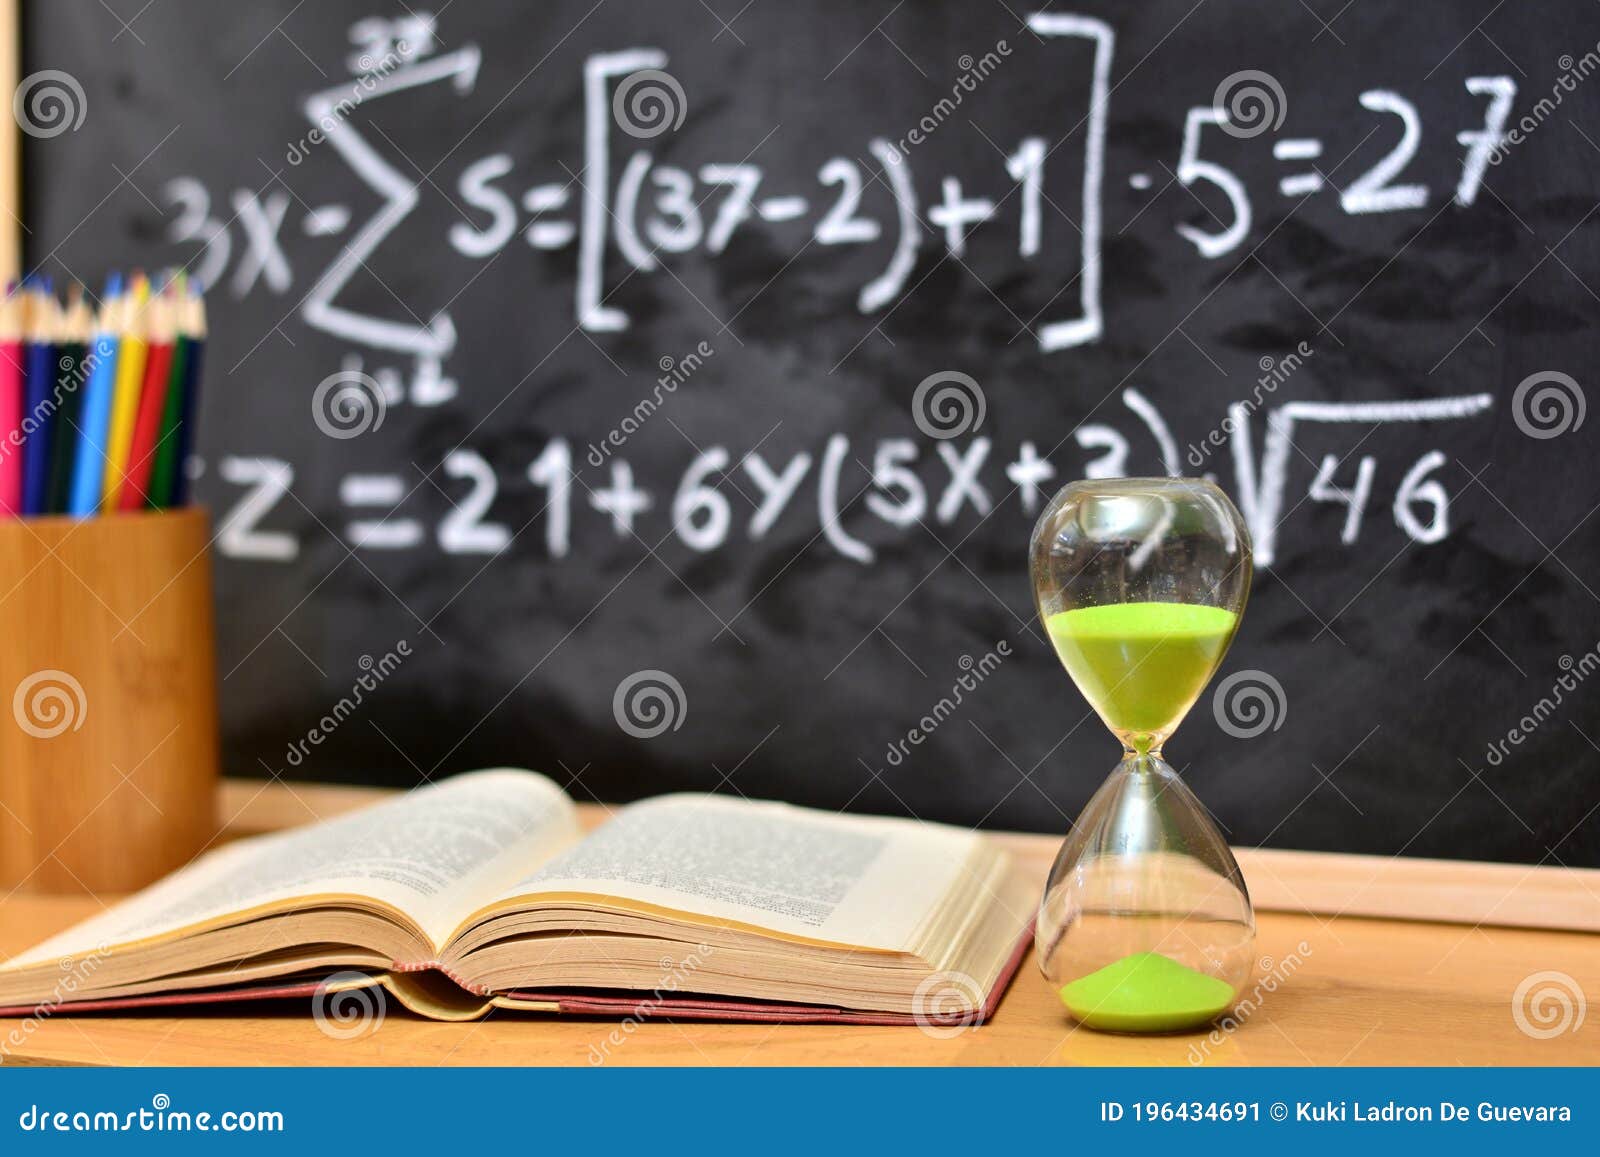 hourglass and book on a table, with a blackboard background